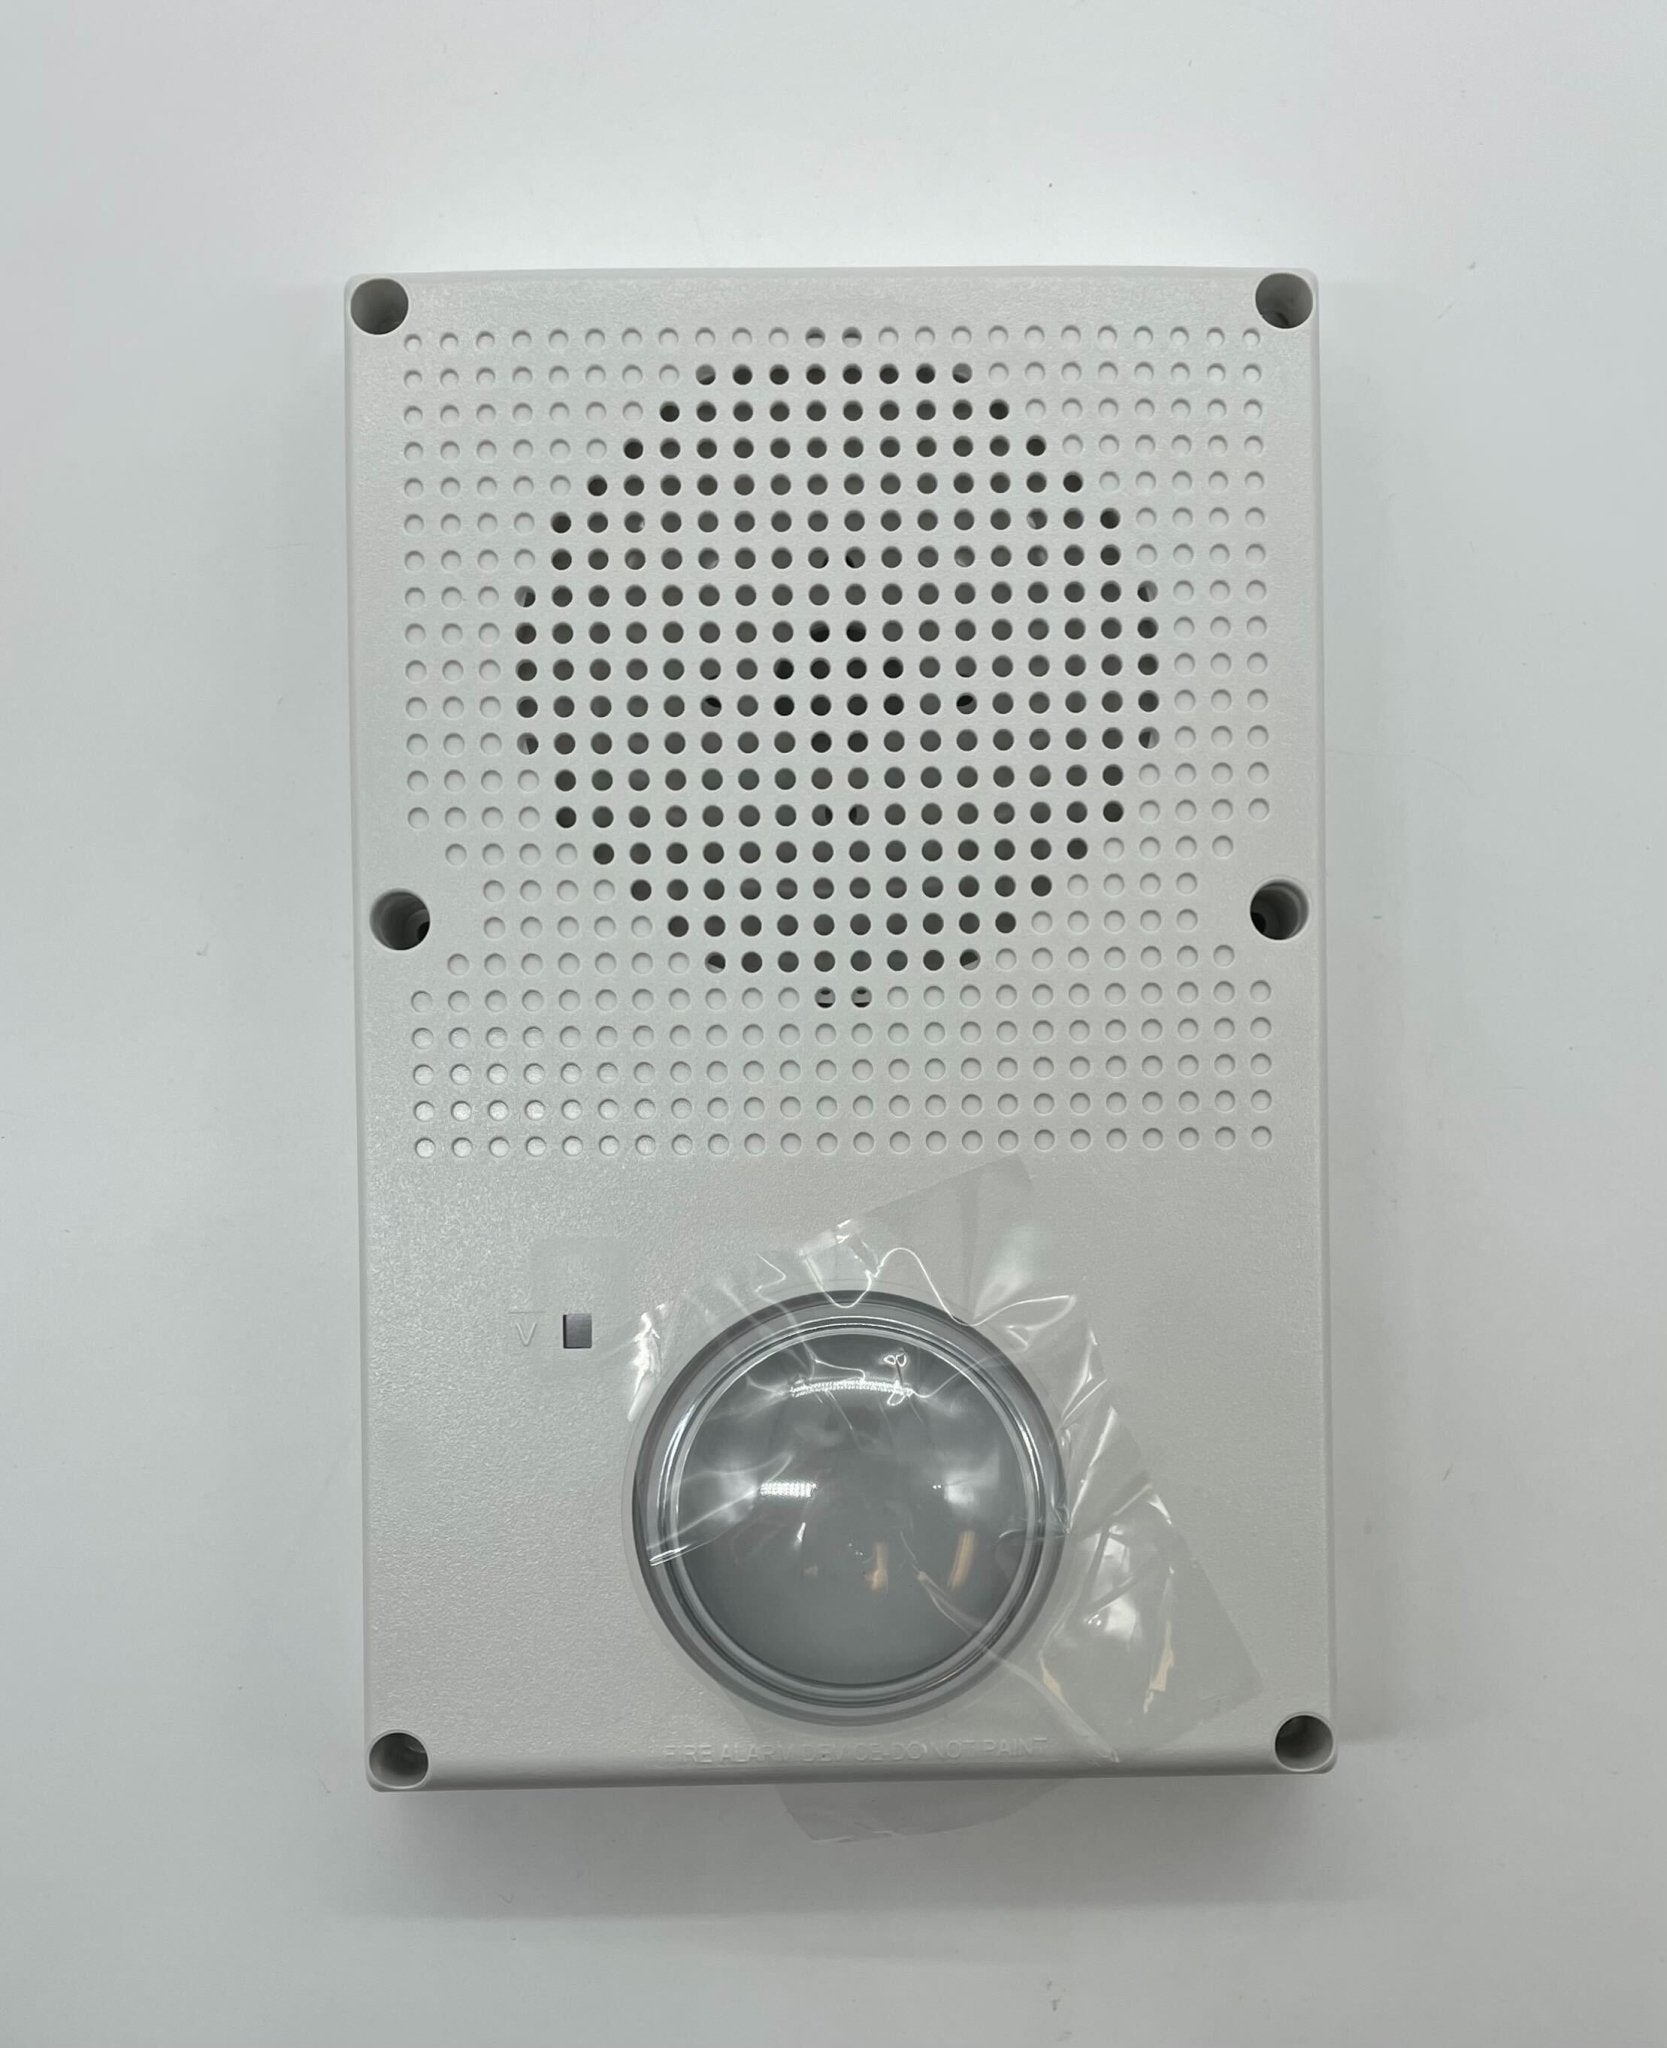 Edwards WG4WN-HVMHC - The Fire Alarm Supplier